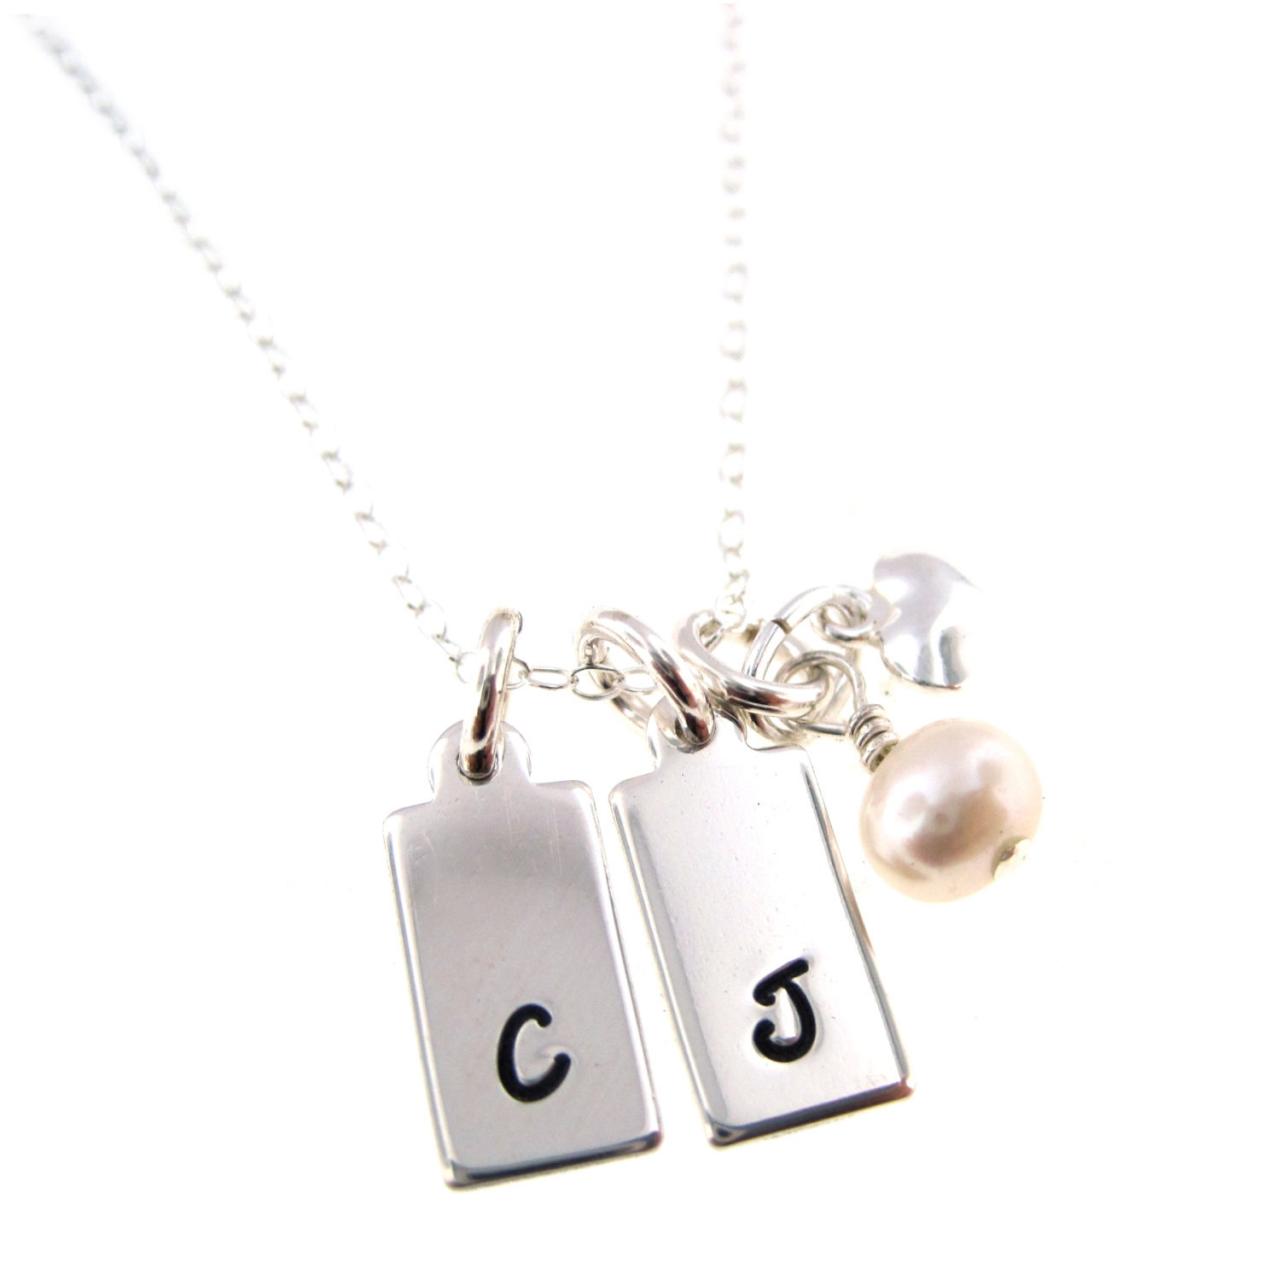 Simple And Elegant Personalized Initials Necklace - Sterling Silver Hand Stamped Jewelry By Hannah Design